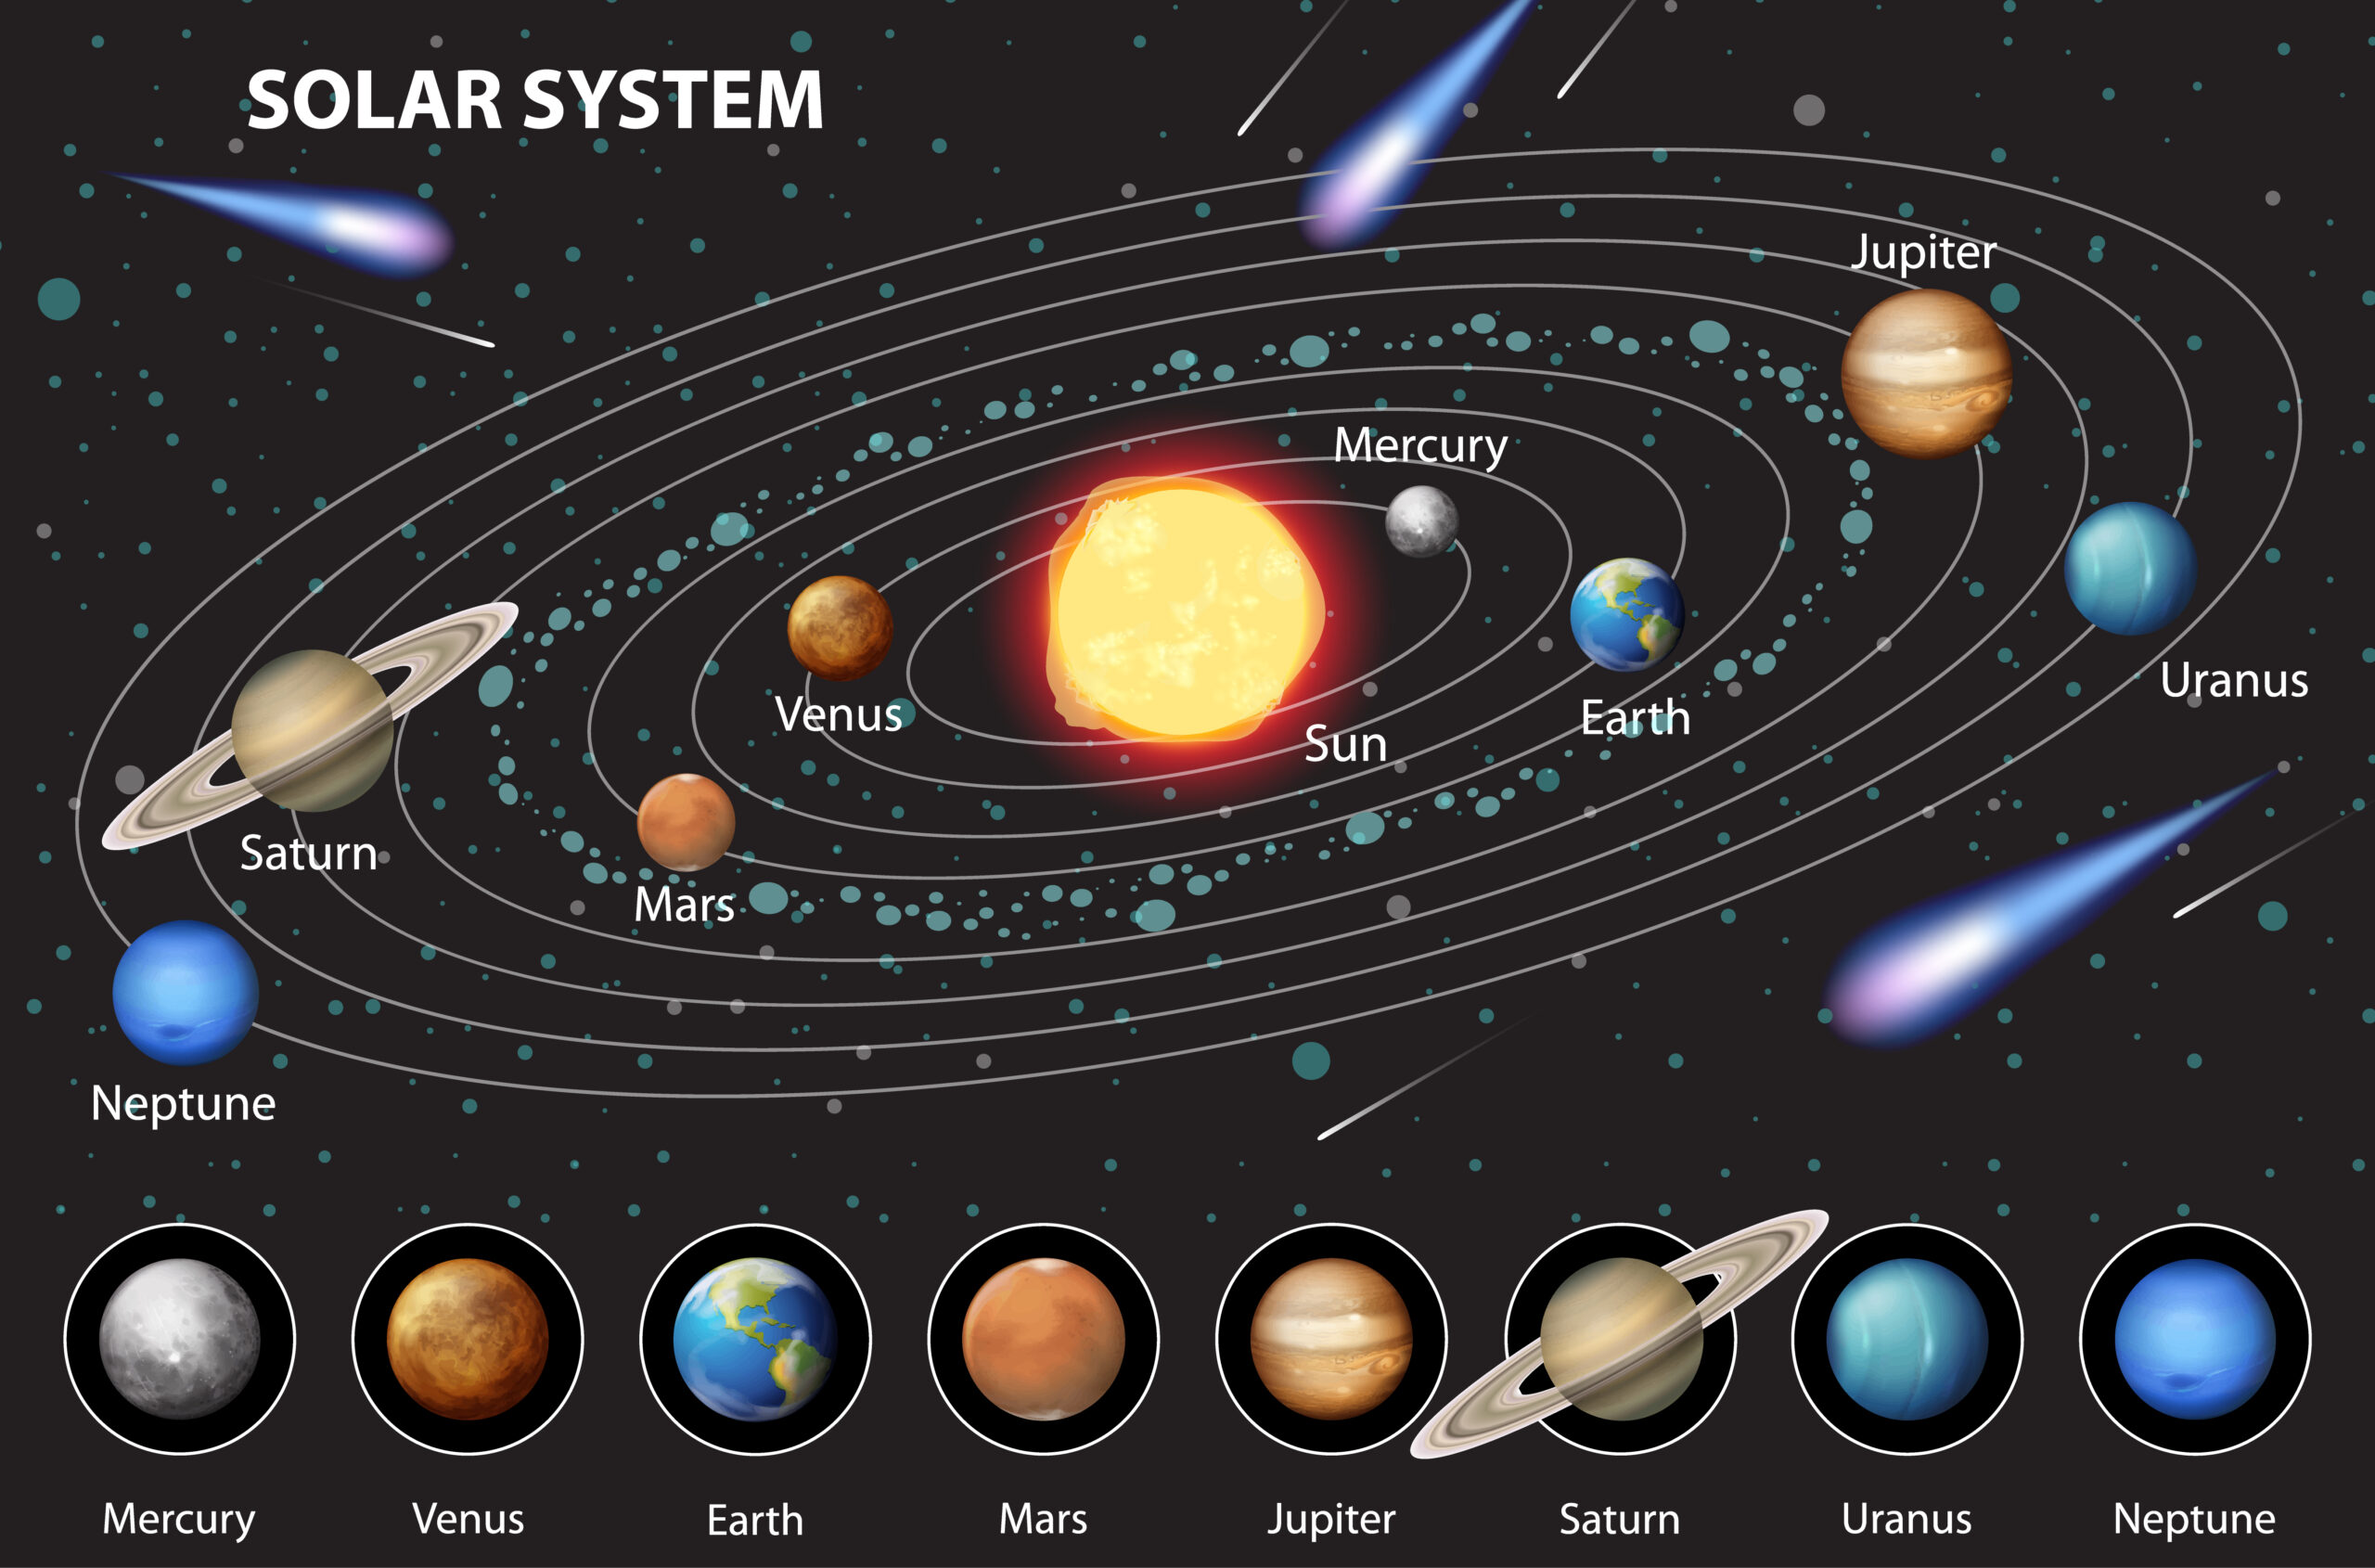 The Seven Summits of the Solar System